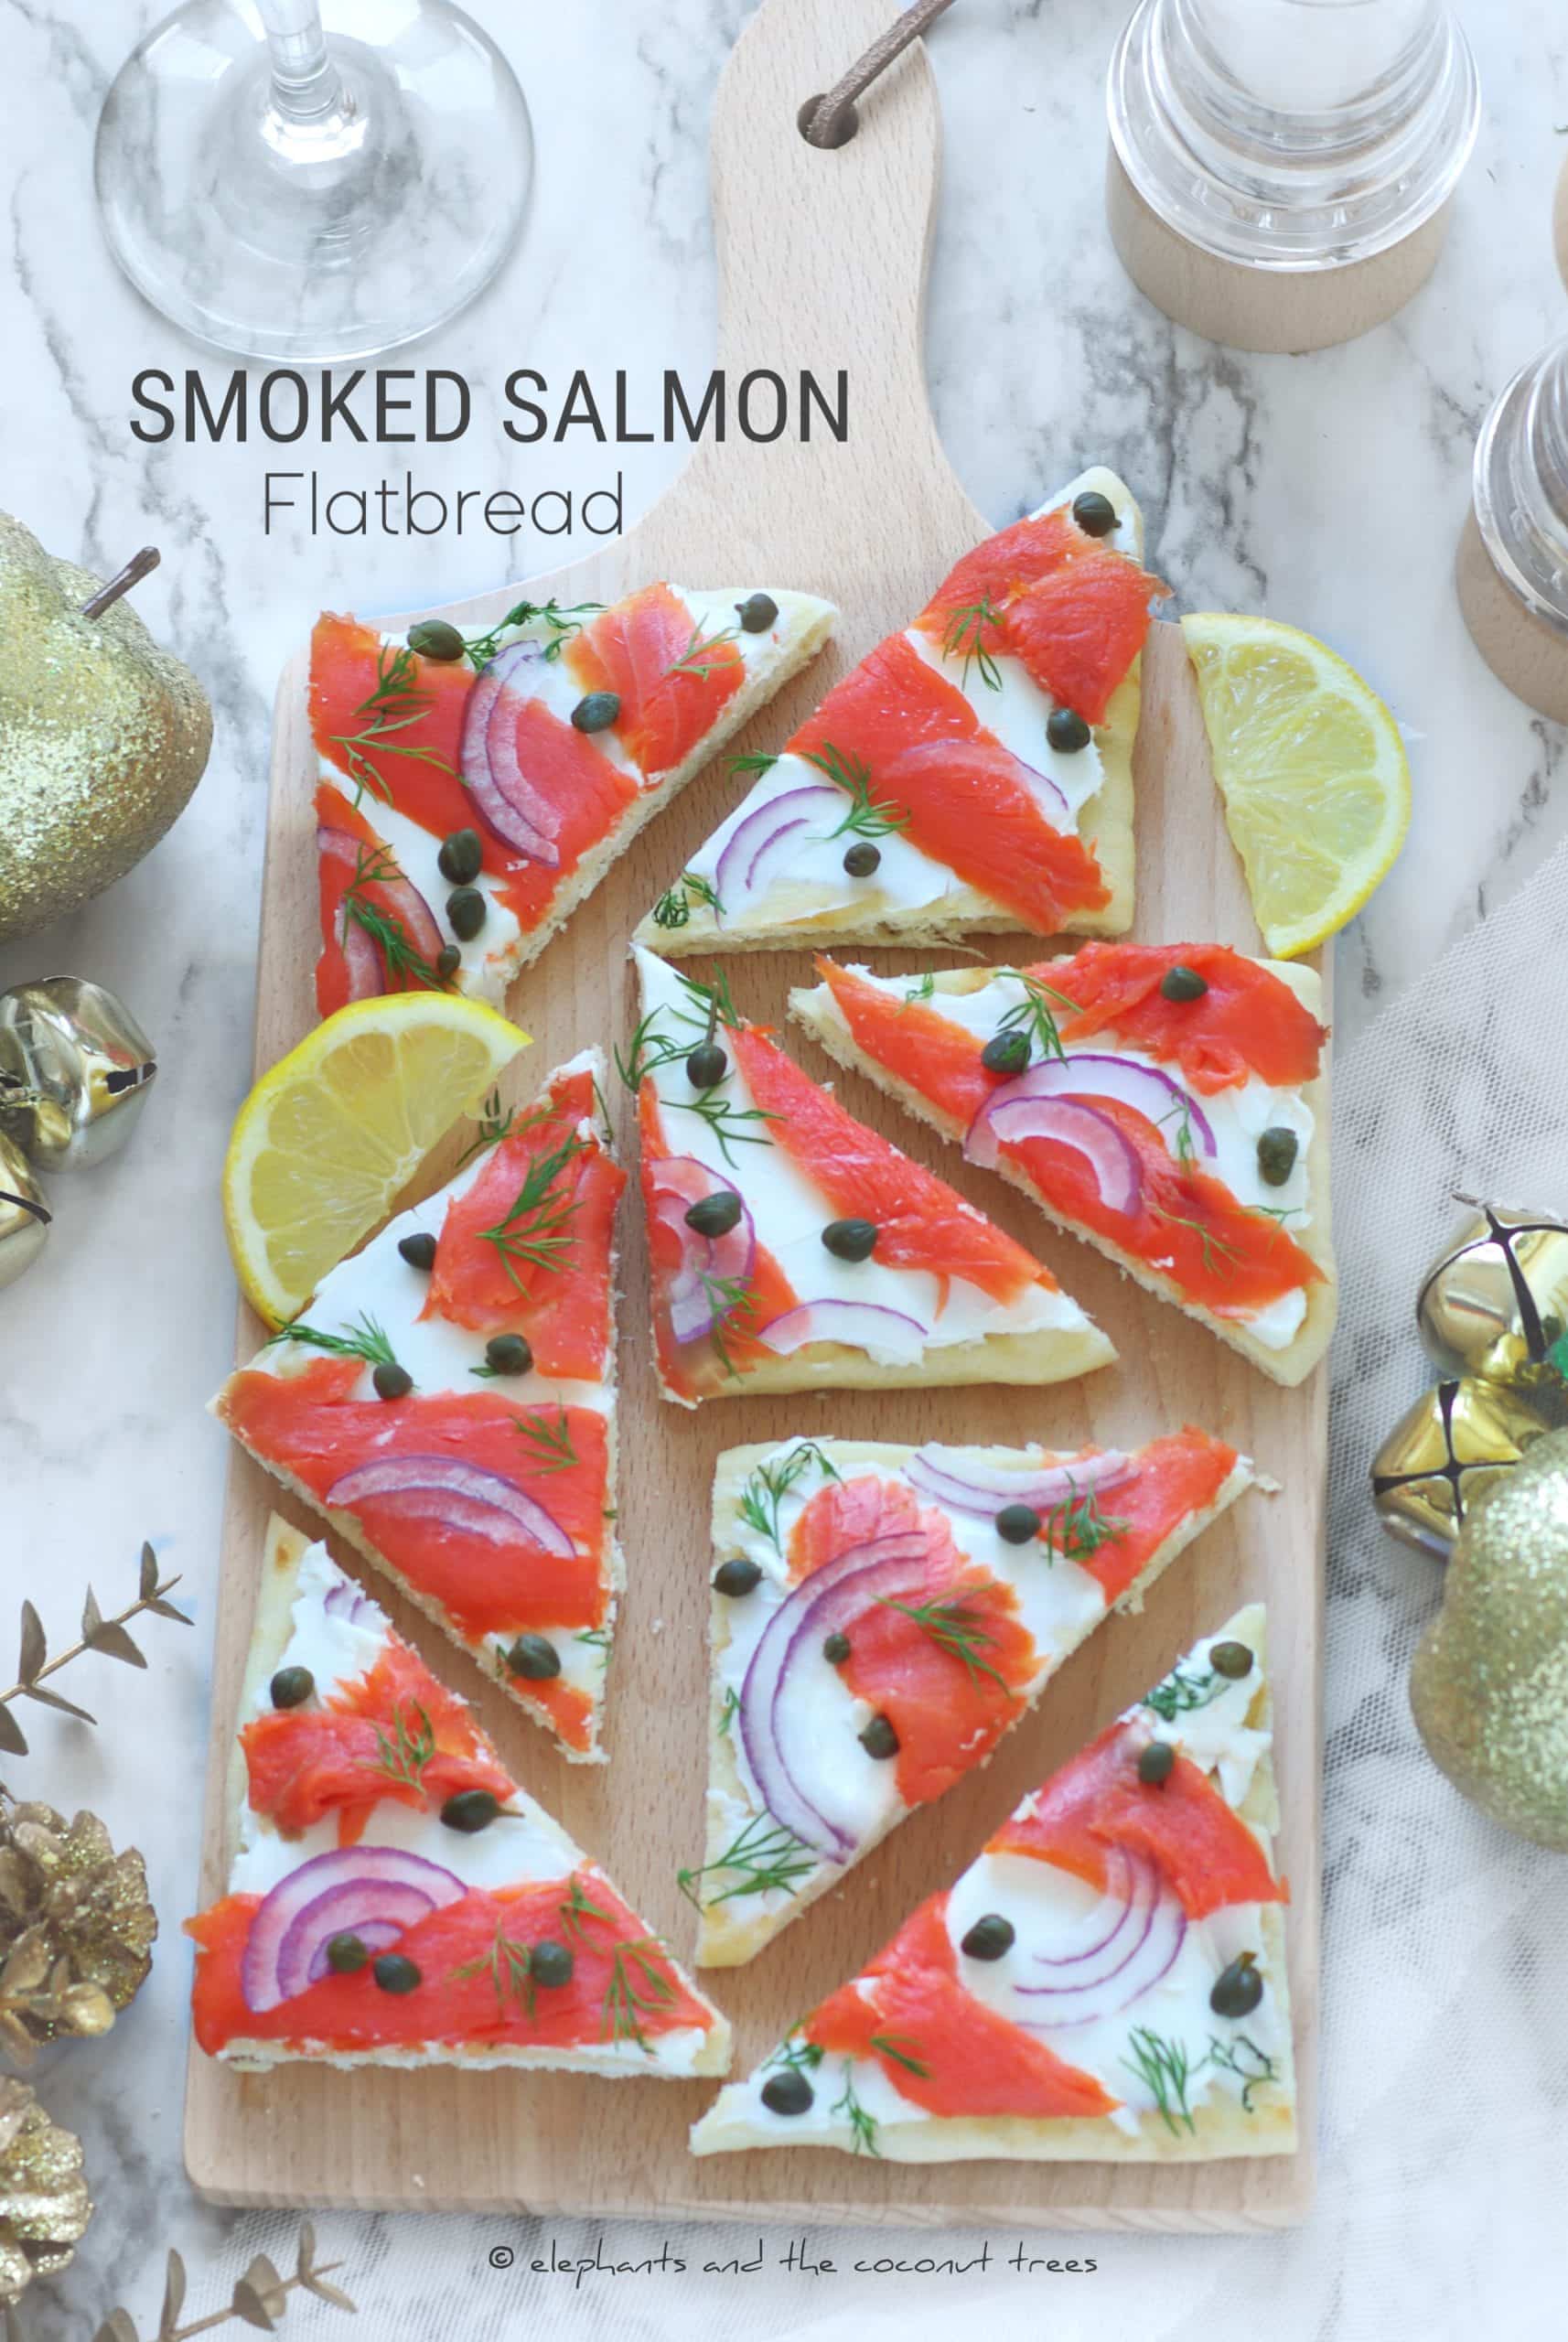 Smoked salmon flatbread is a stunning appetizer that comes together in 5 minutes.